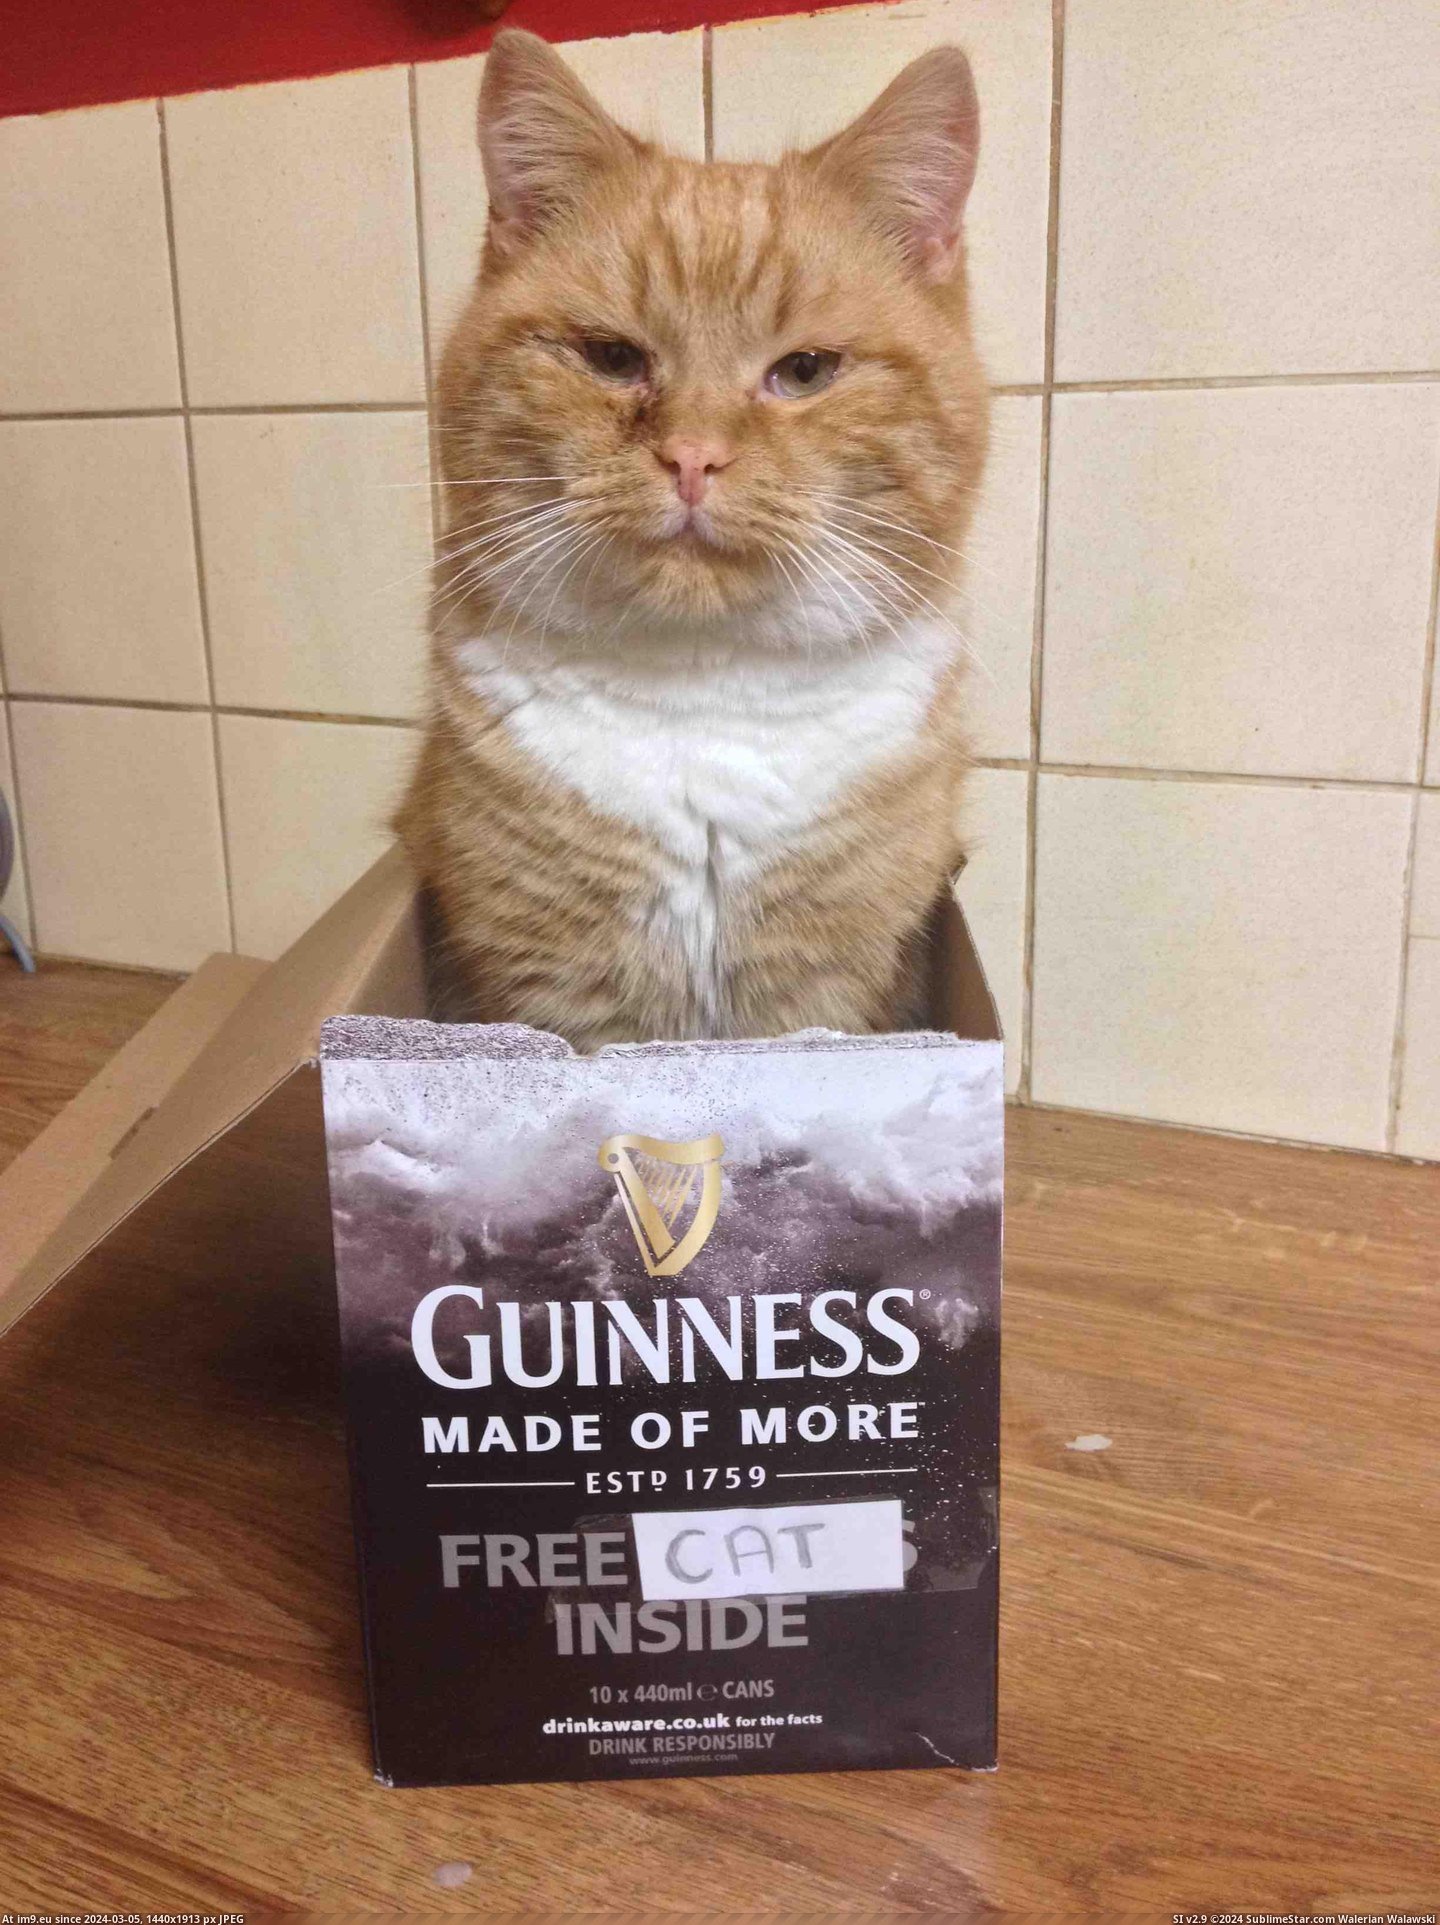 #Cats #You #Purchase #Guinness #Get #Free [Cats] With every purchase of Guinness, you get a free... Pic. (Изображение из альбом My r/CATS favs))